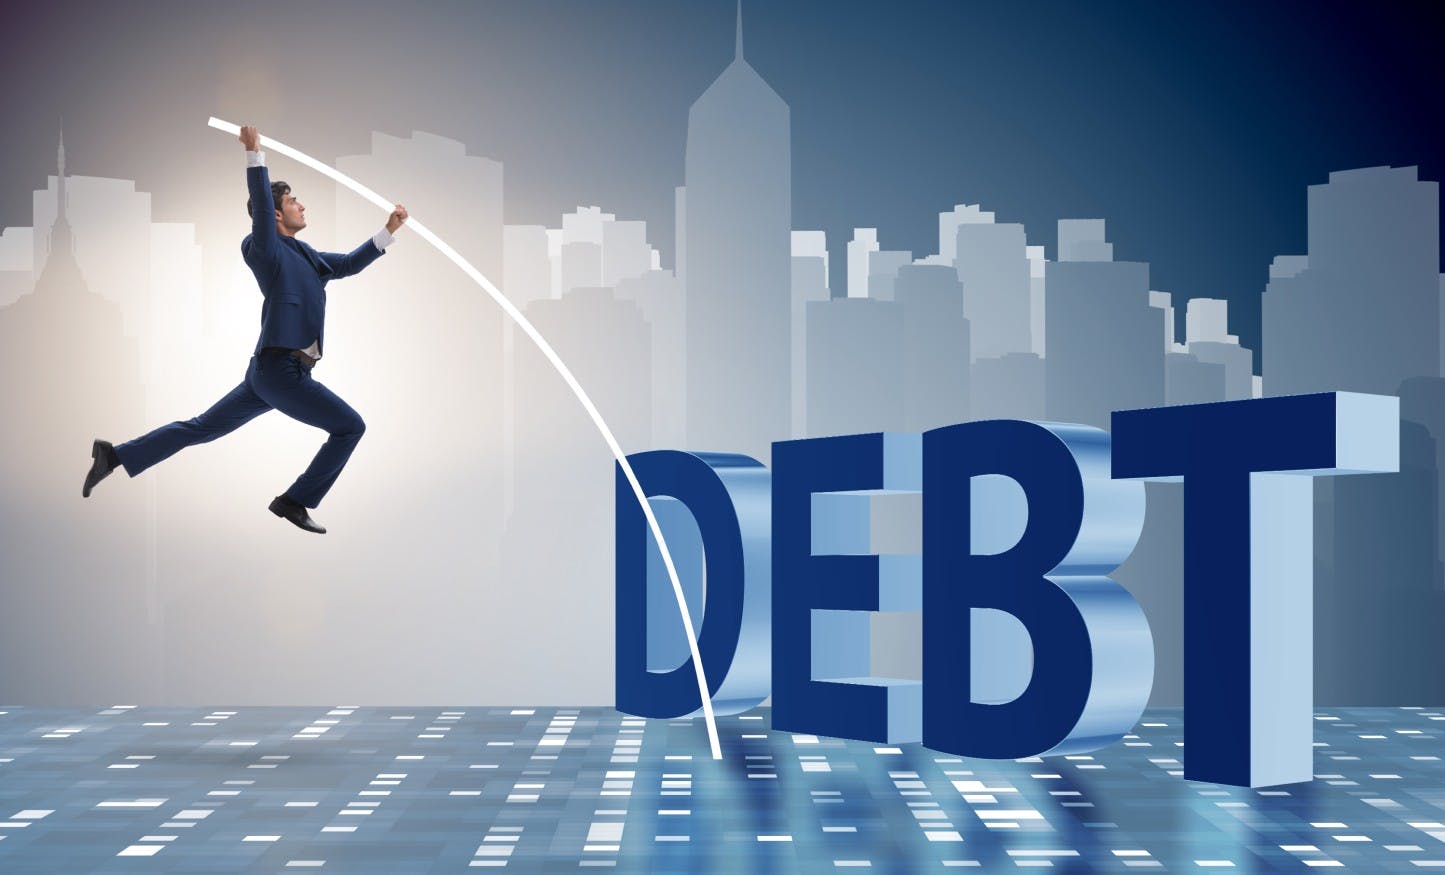 Debt Relief: Should You Resort to That?